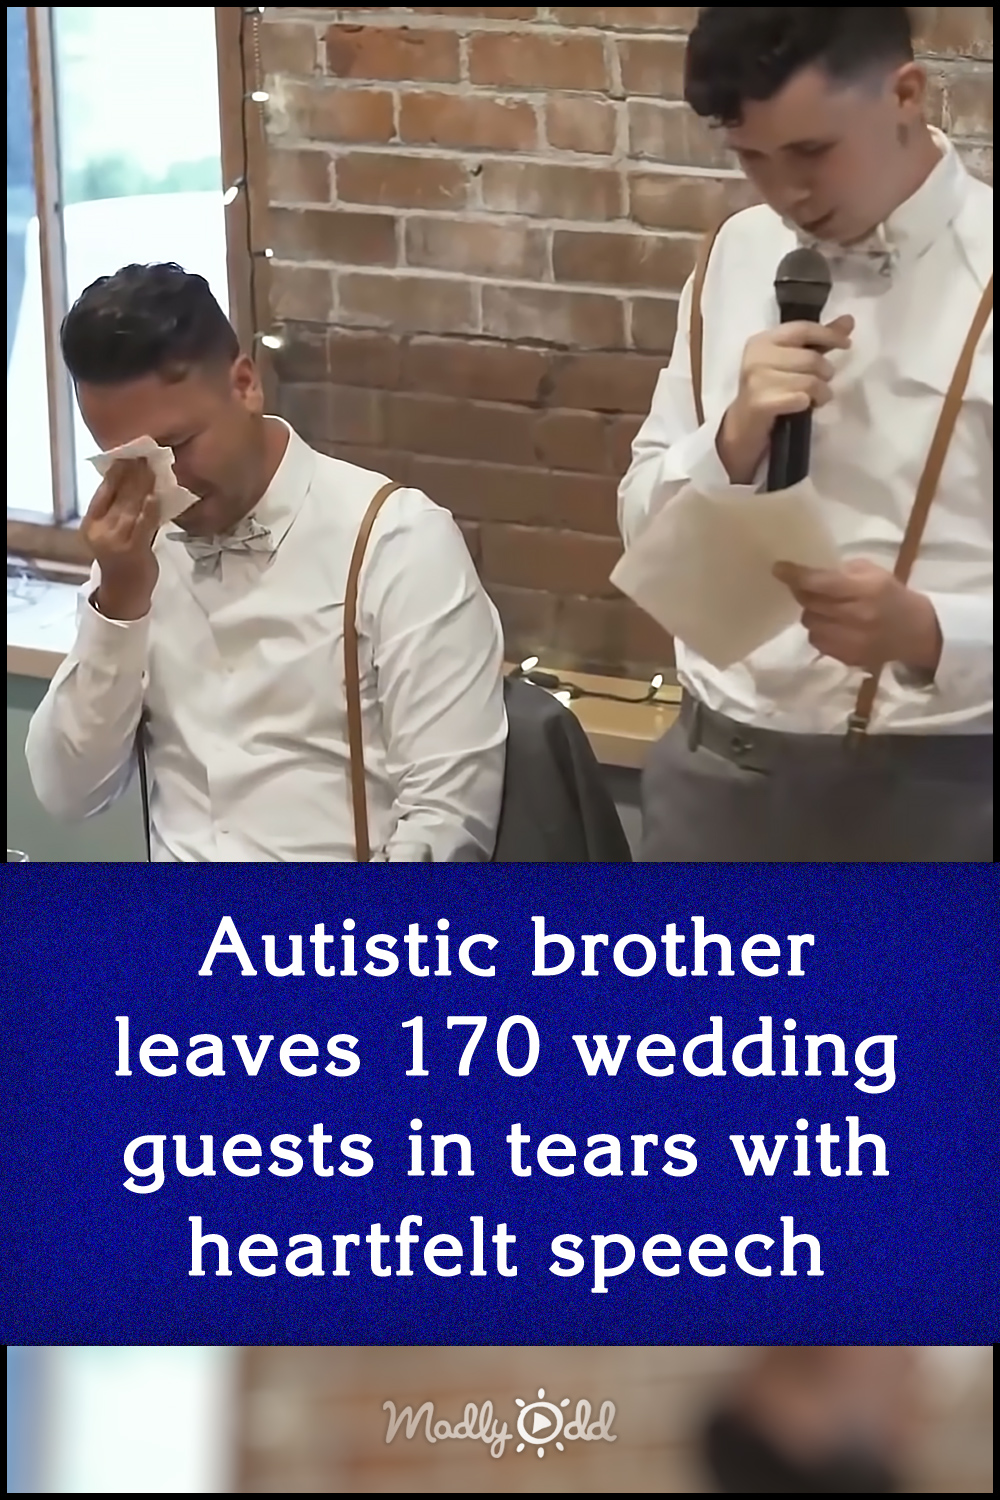 Autistic brother leaves 170 wedding guests in tears with heartfelt speech